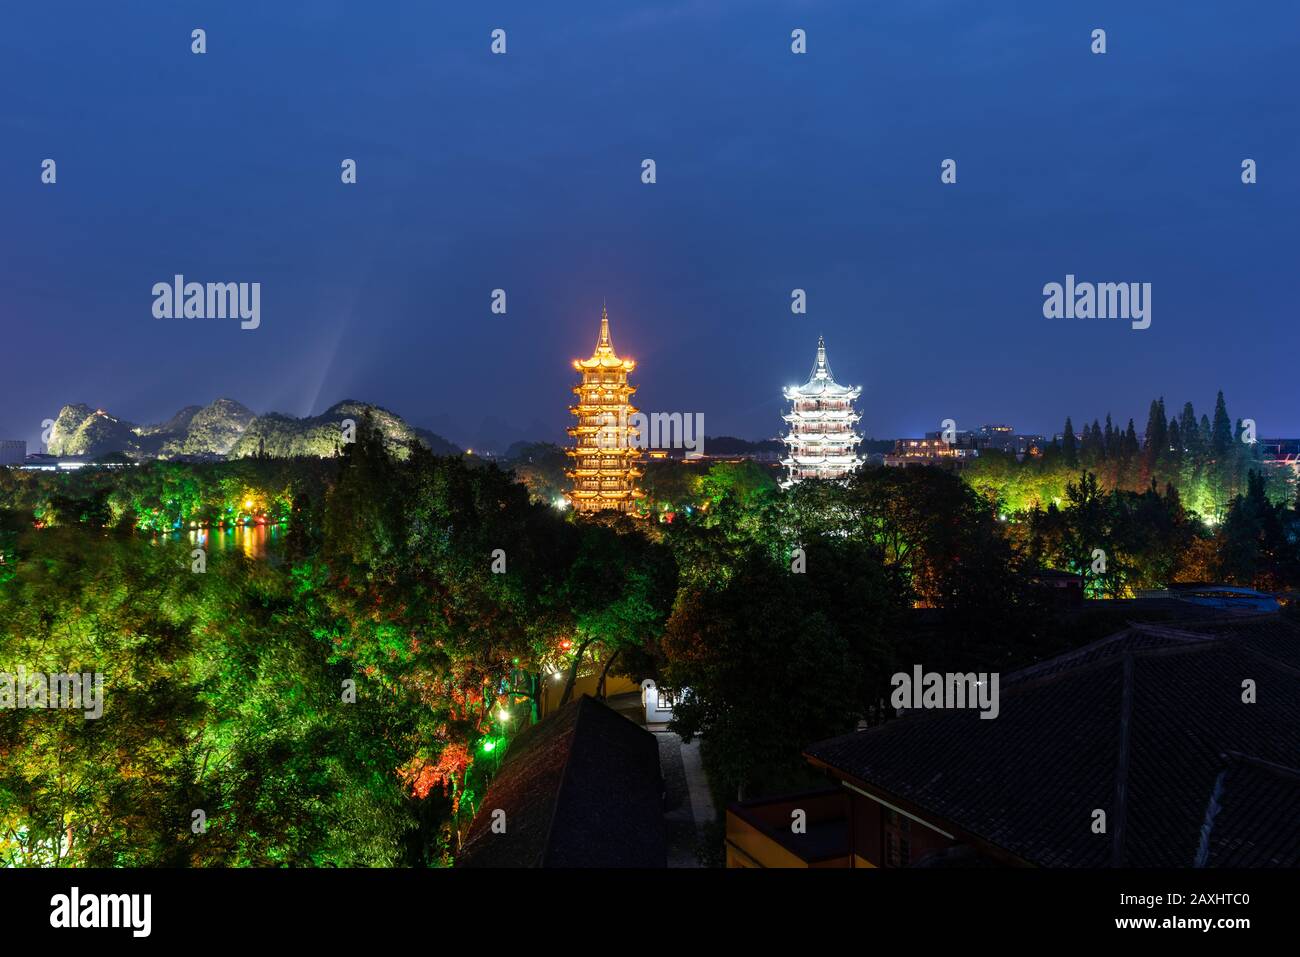 Chinese Temple in Guilin China at night Stock Photo